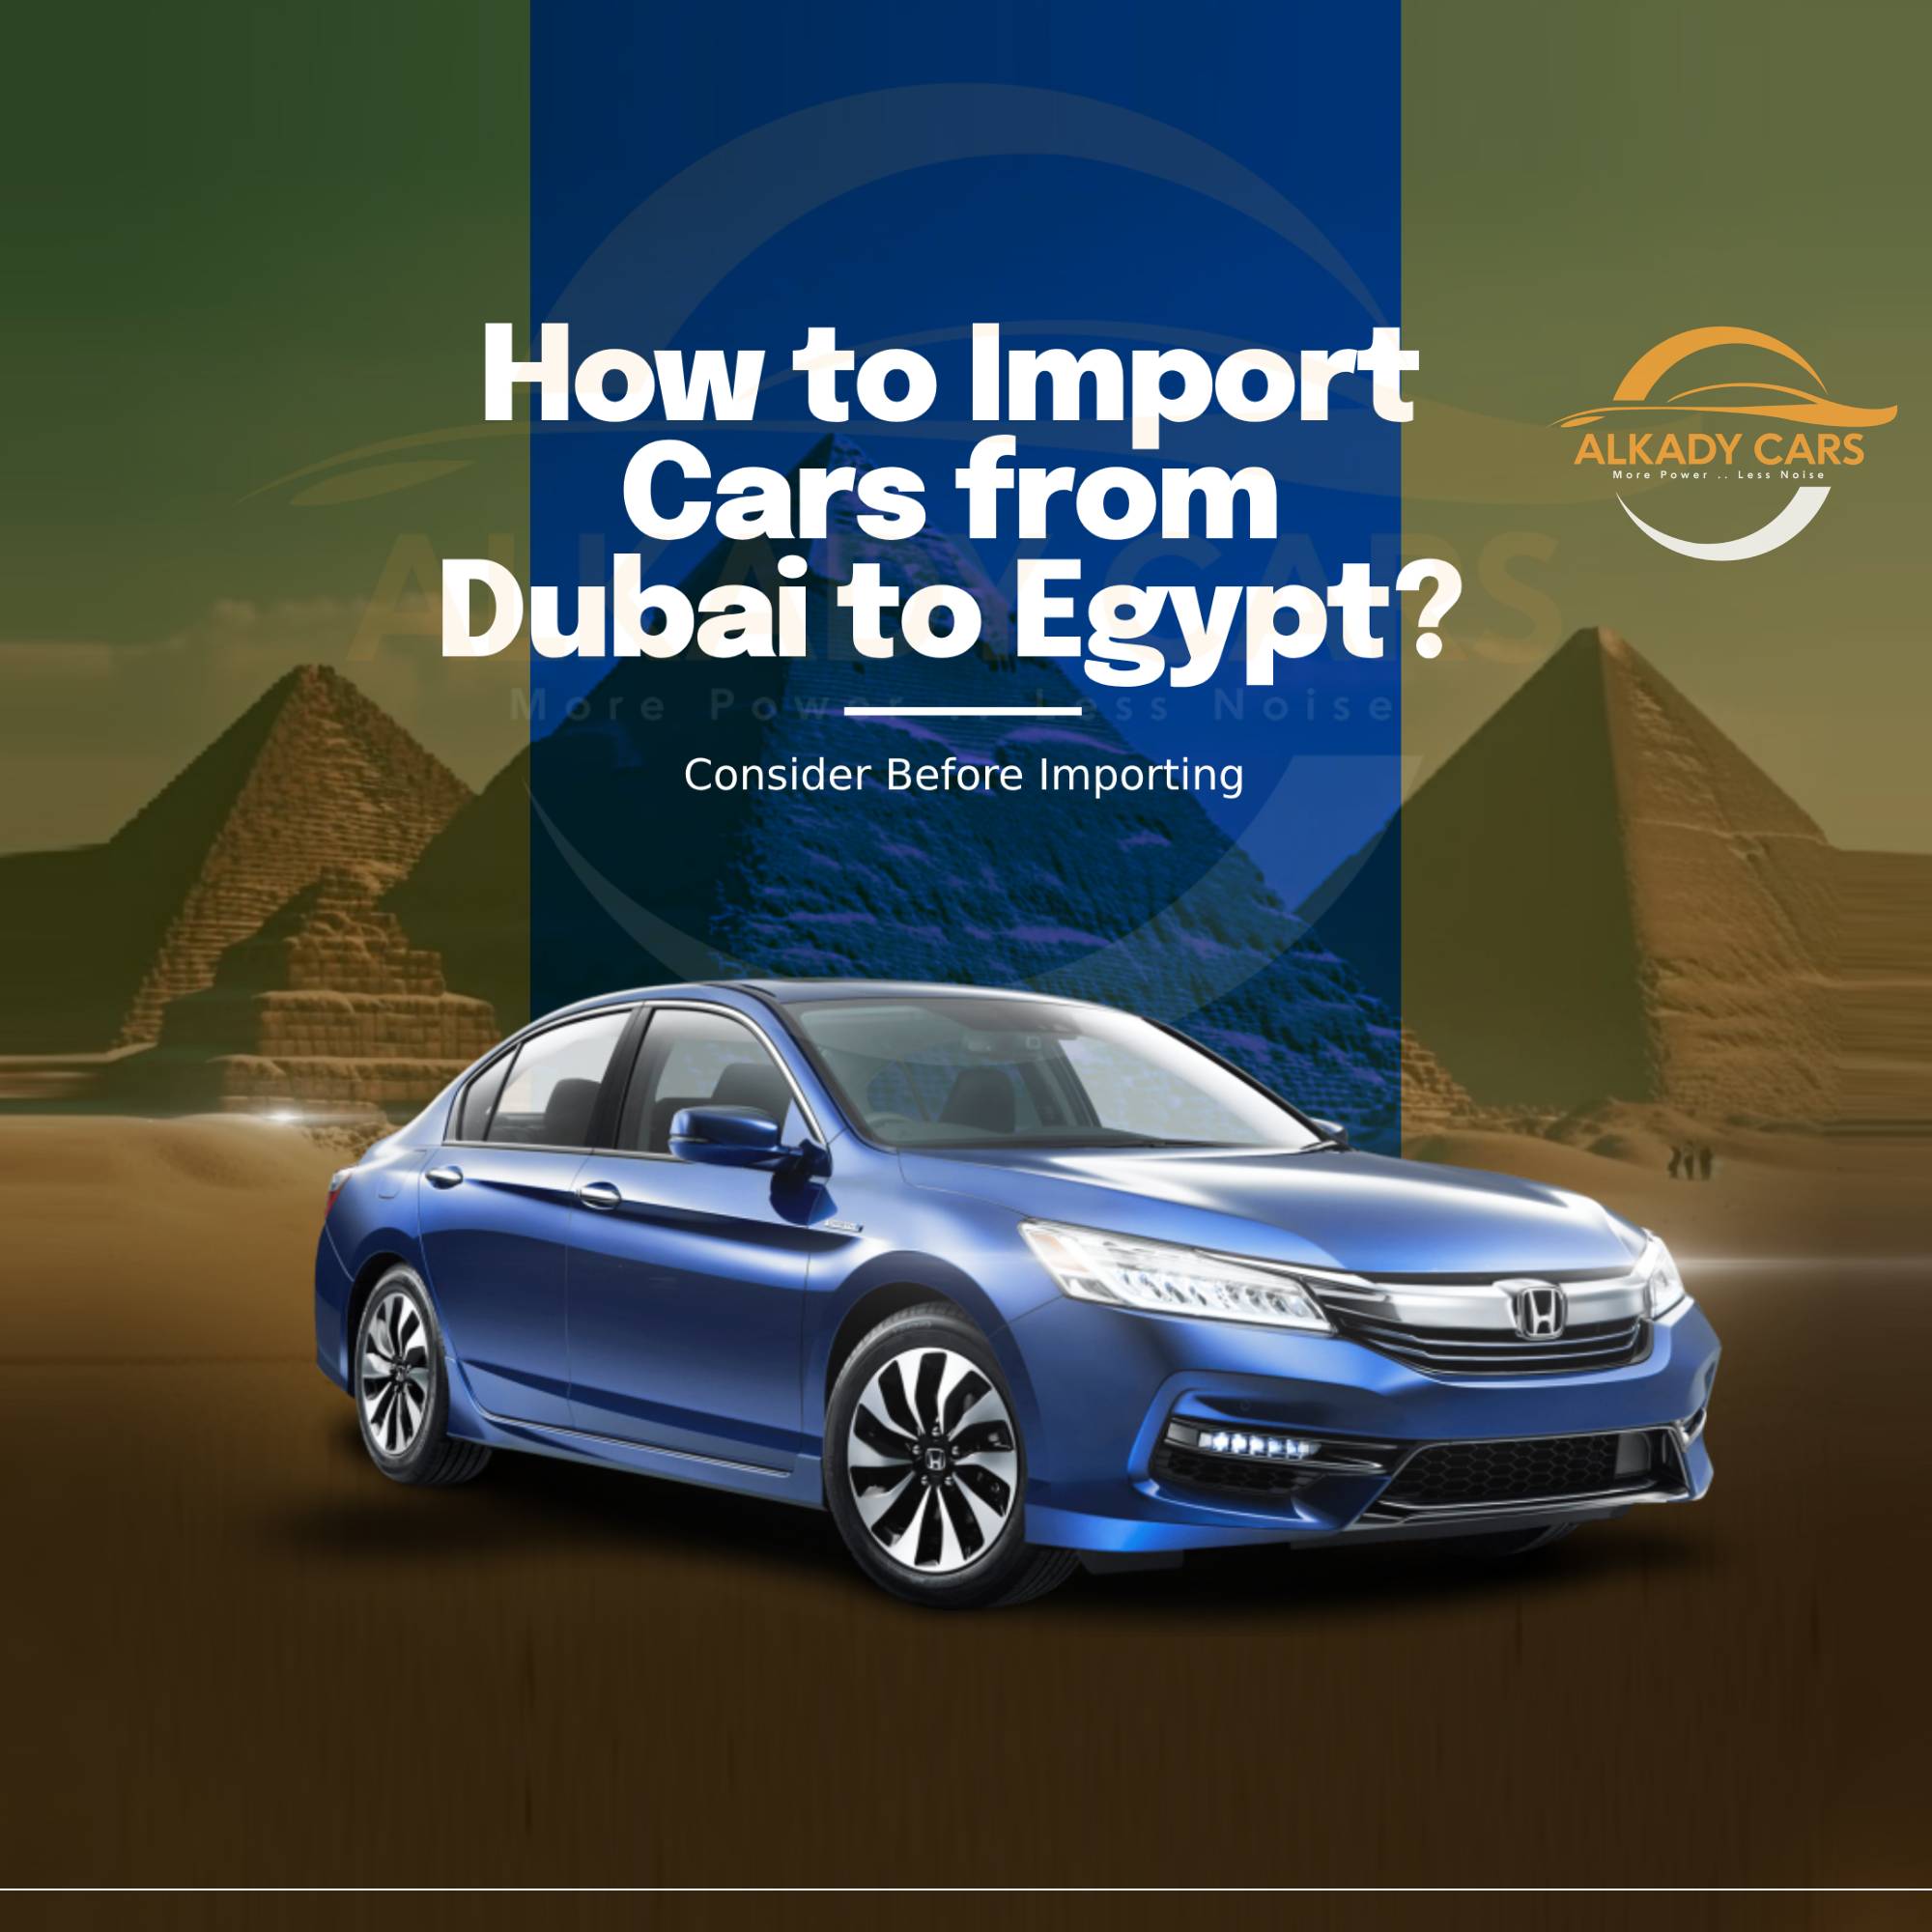 How to Import Cars from Dubai to Egypt?